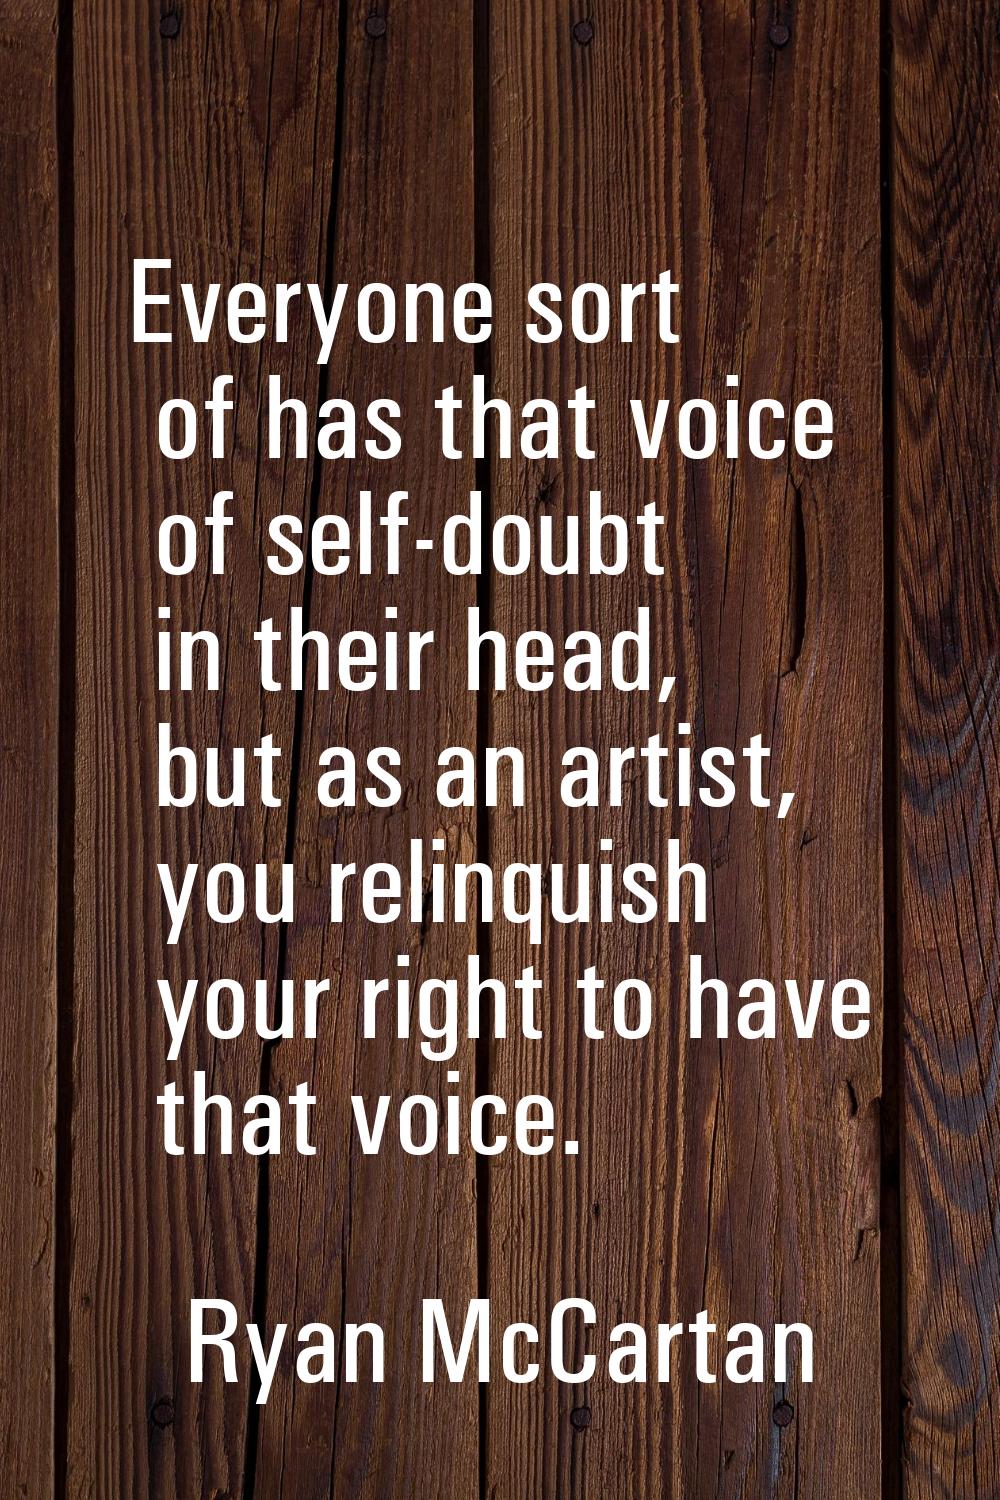 Everyone sort of has that voice of self-doubt in their head, but as an artist, you relinquish your 